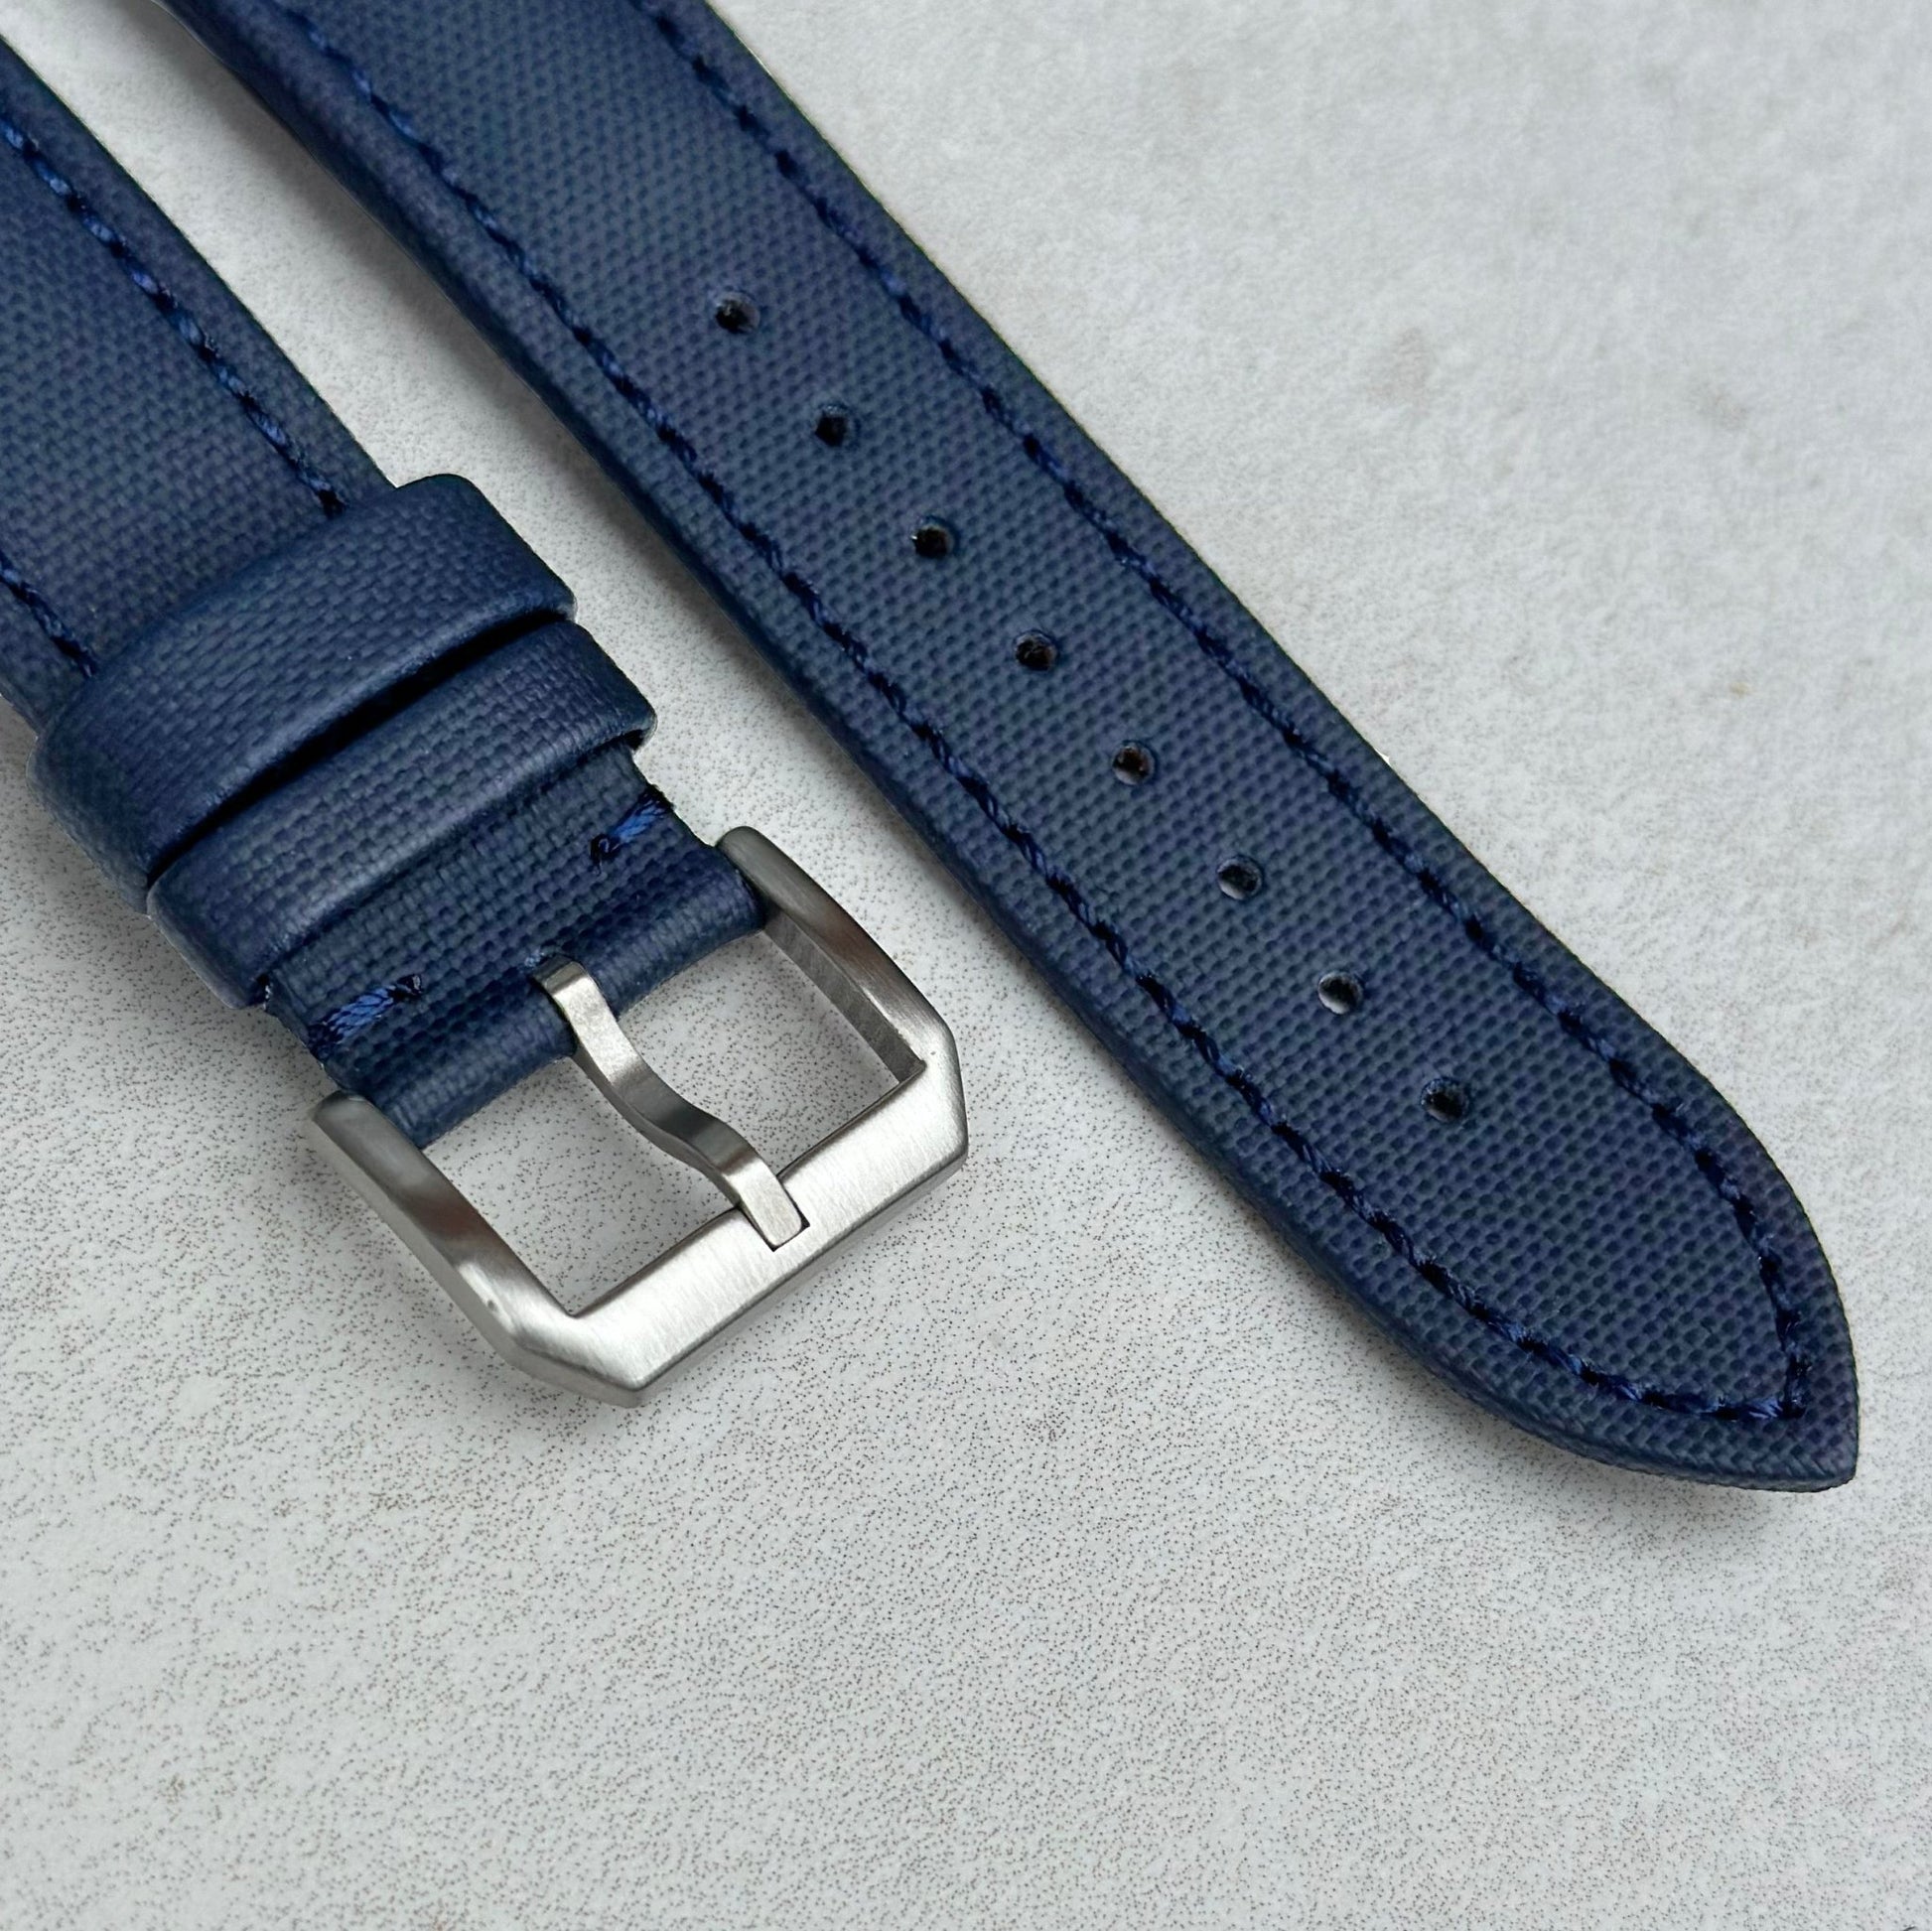 Brushed 316L stainless steel buckle on the Bermuda navy blue sail cloth watch strap. Watch And Strap.